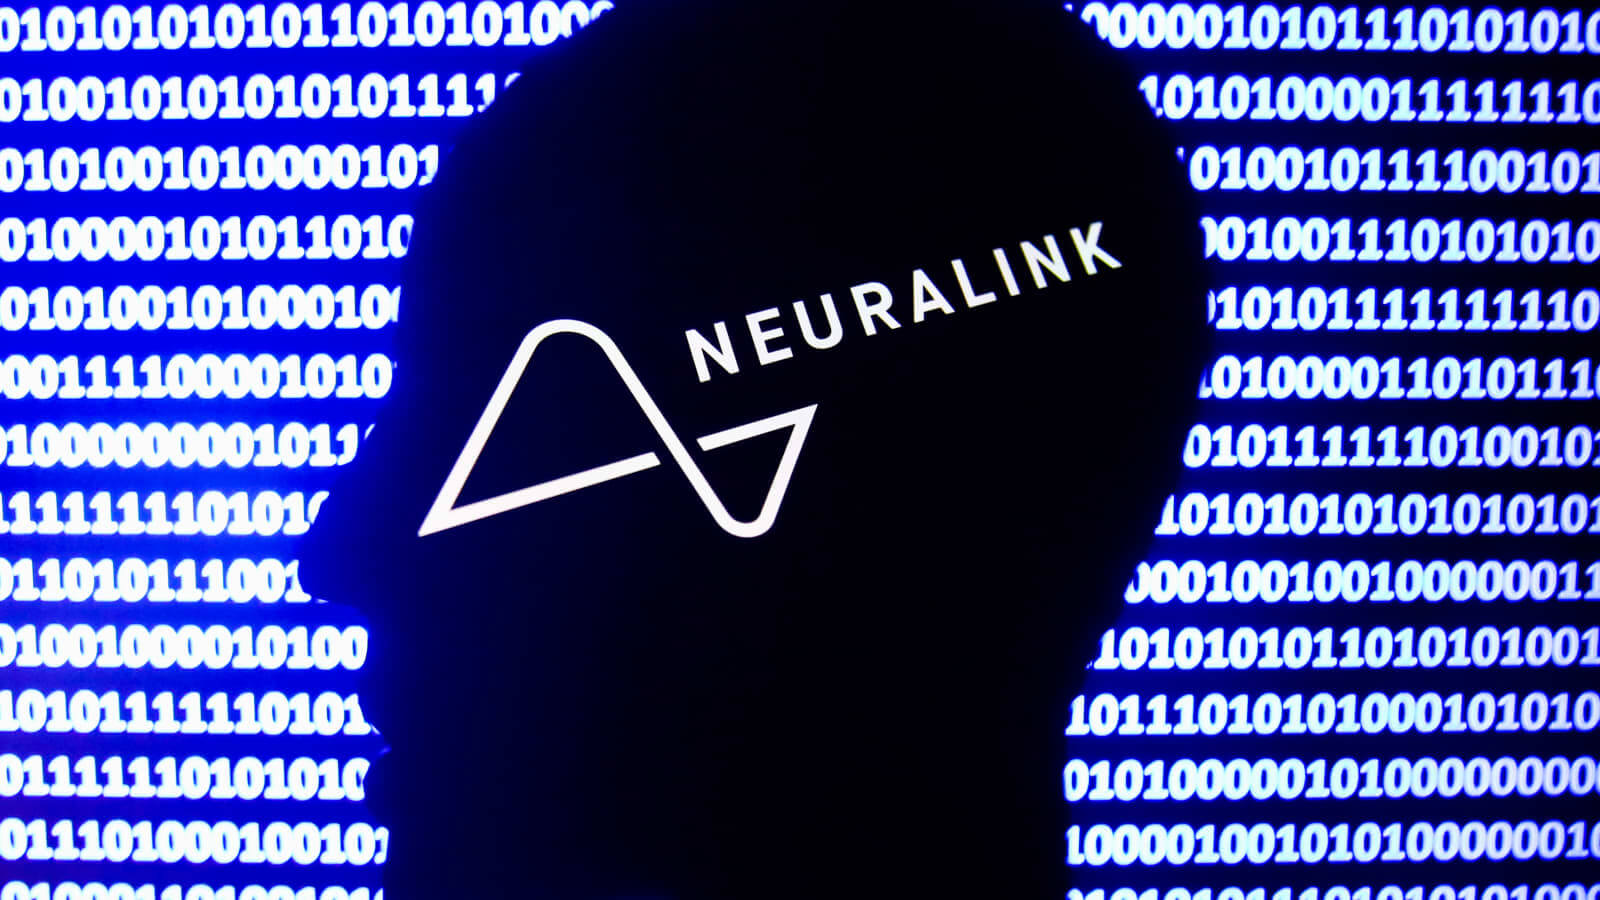 Mind Over Mouse: Neuralink Claims First Human Controls Computer with Thoughts, But Questions Remain